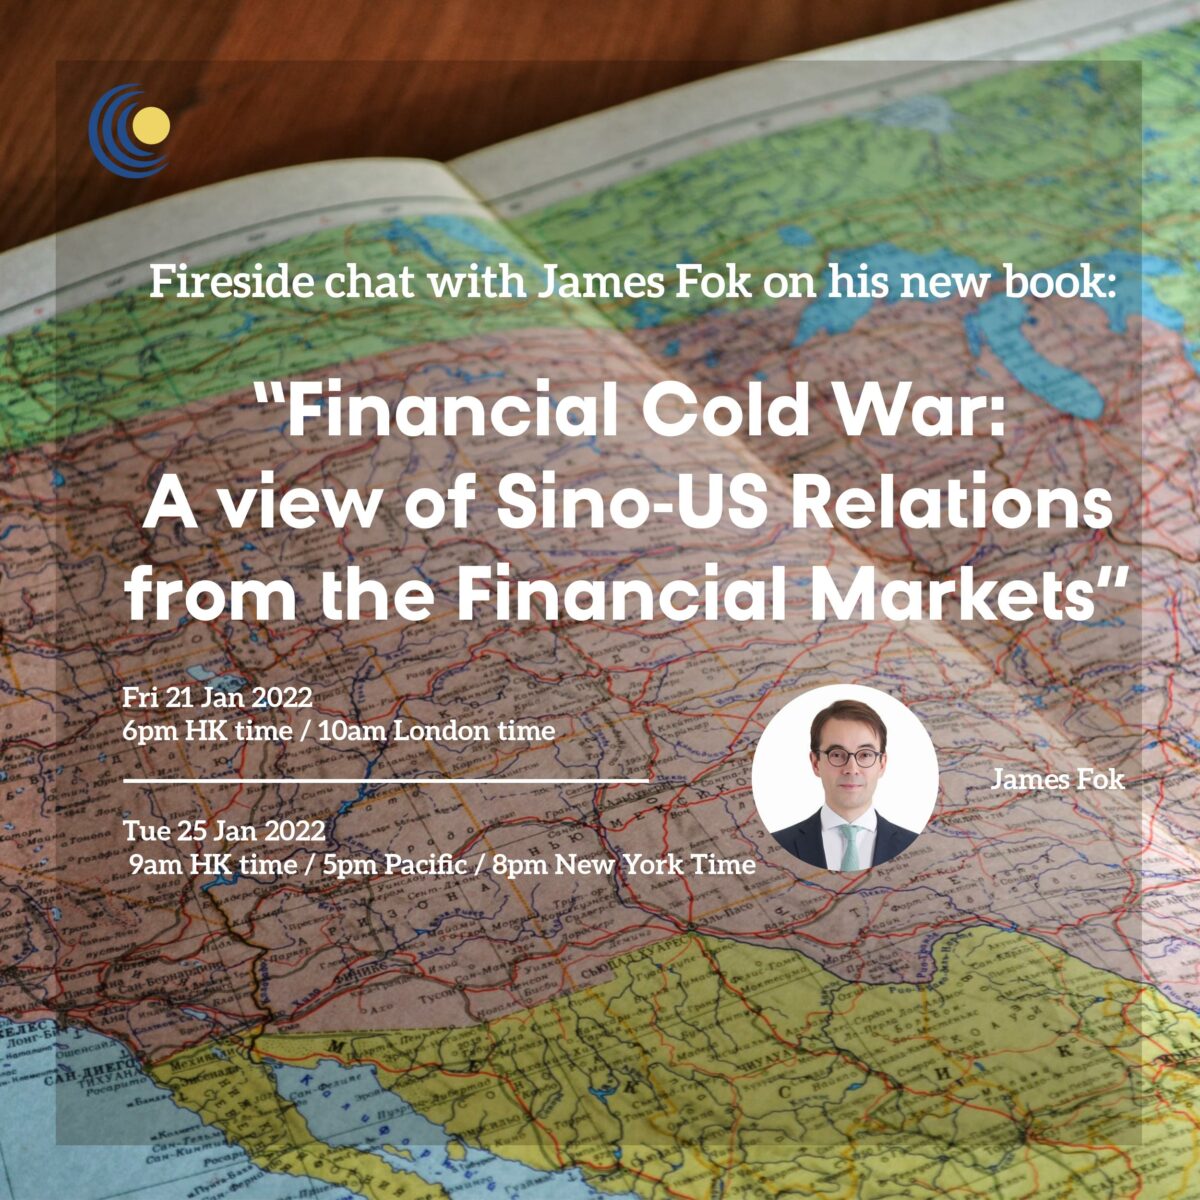 “Financial Cold War: A view of Sino-US relations from the Financial Markets”